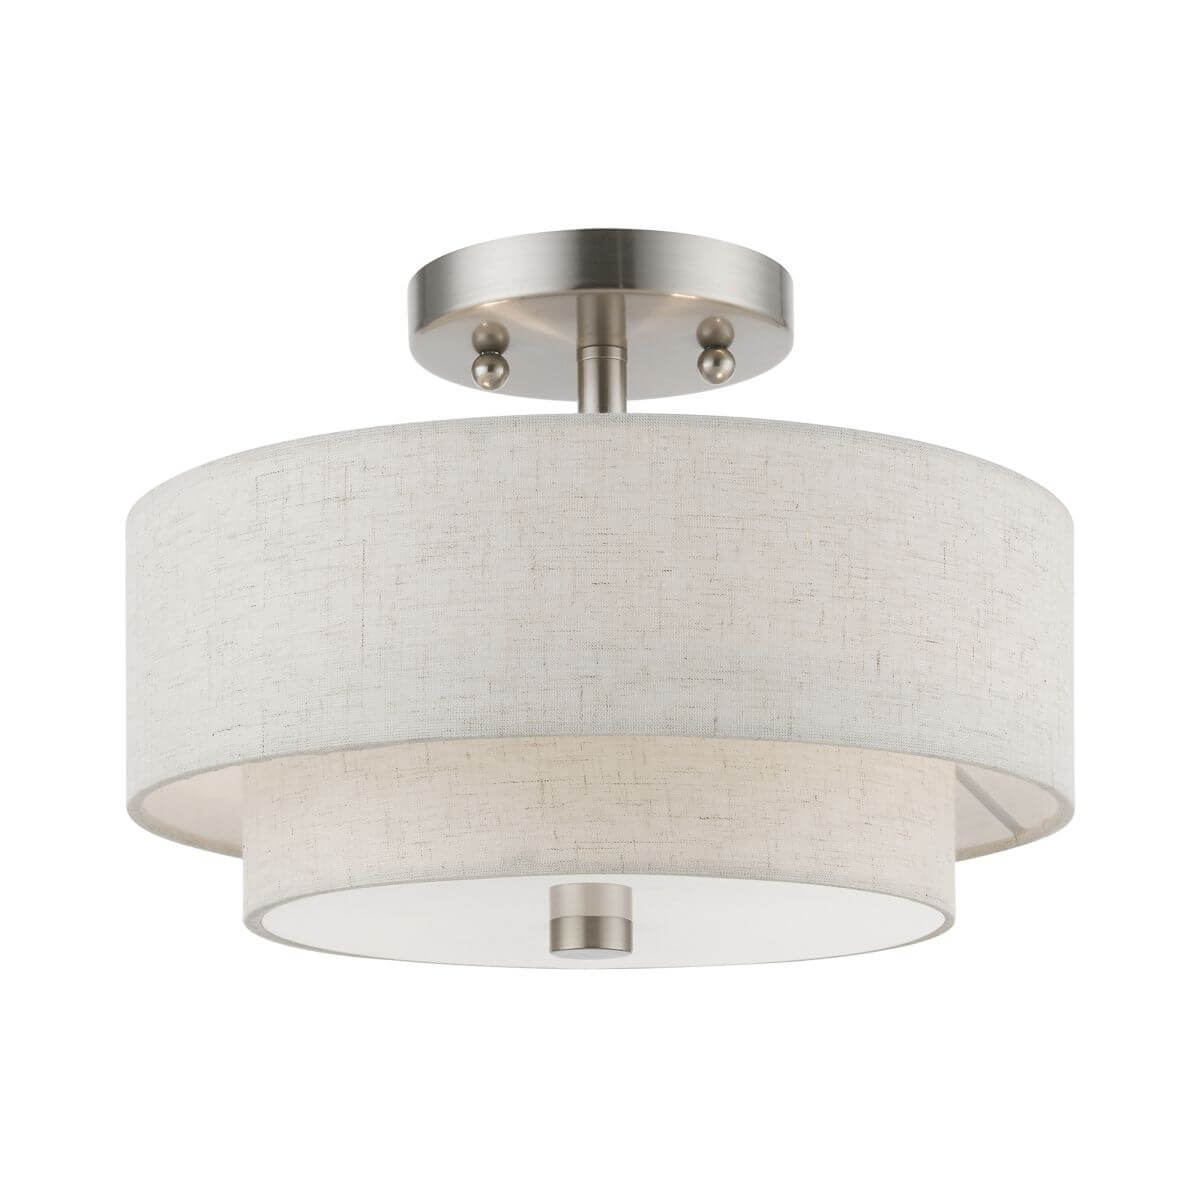 2 Light 11 inch Semi-Flush Mount in Brushed Nickel with Hand Crafted Oatmeal Color Hardback Fabric Shade - White Fabric Inside - 245464